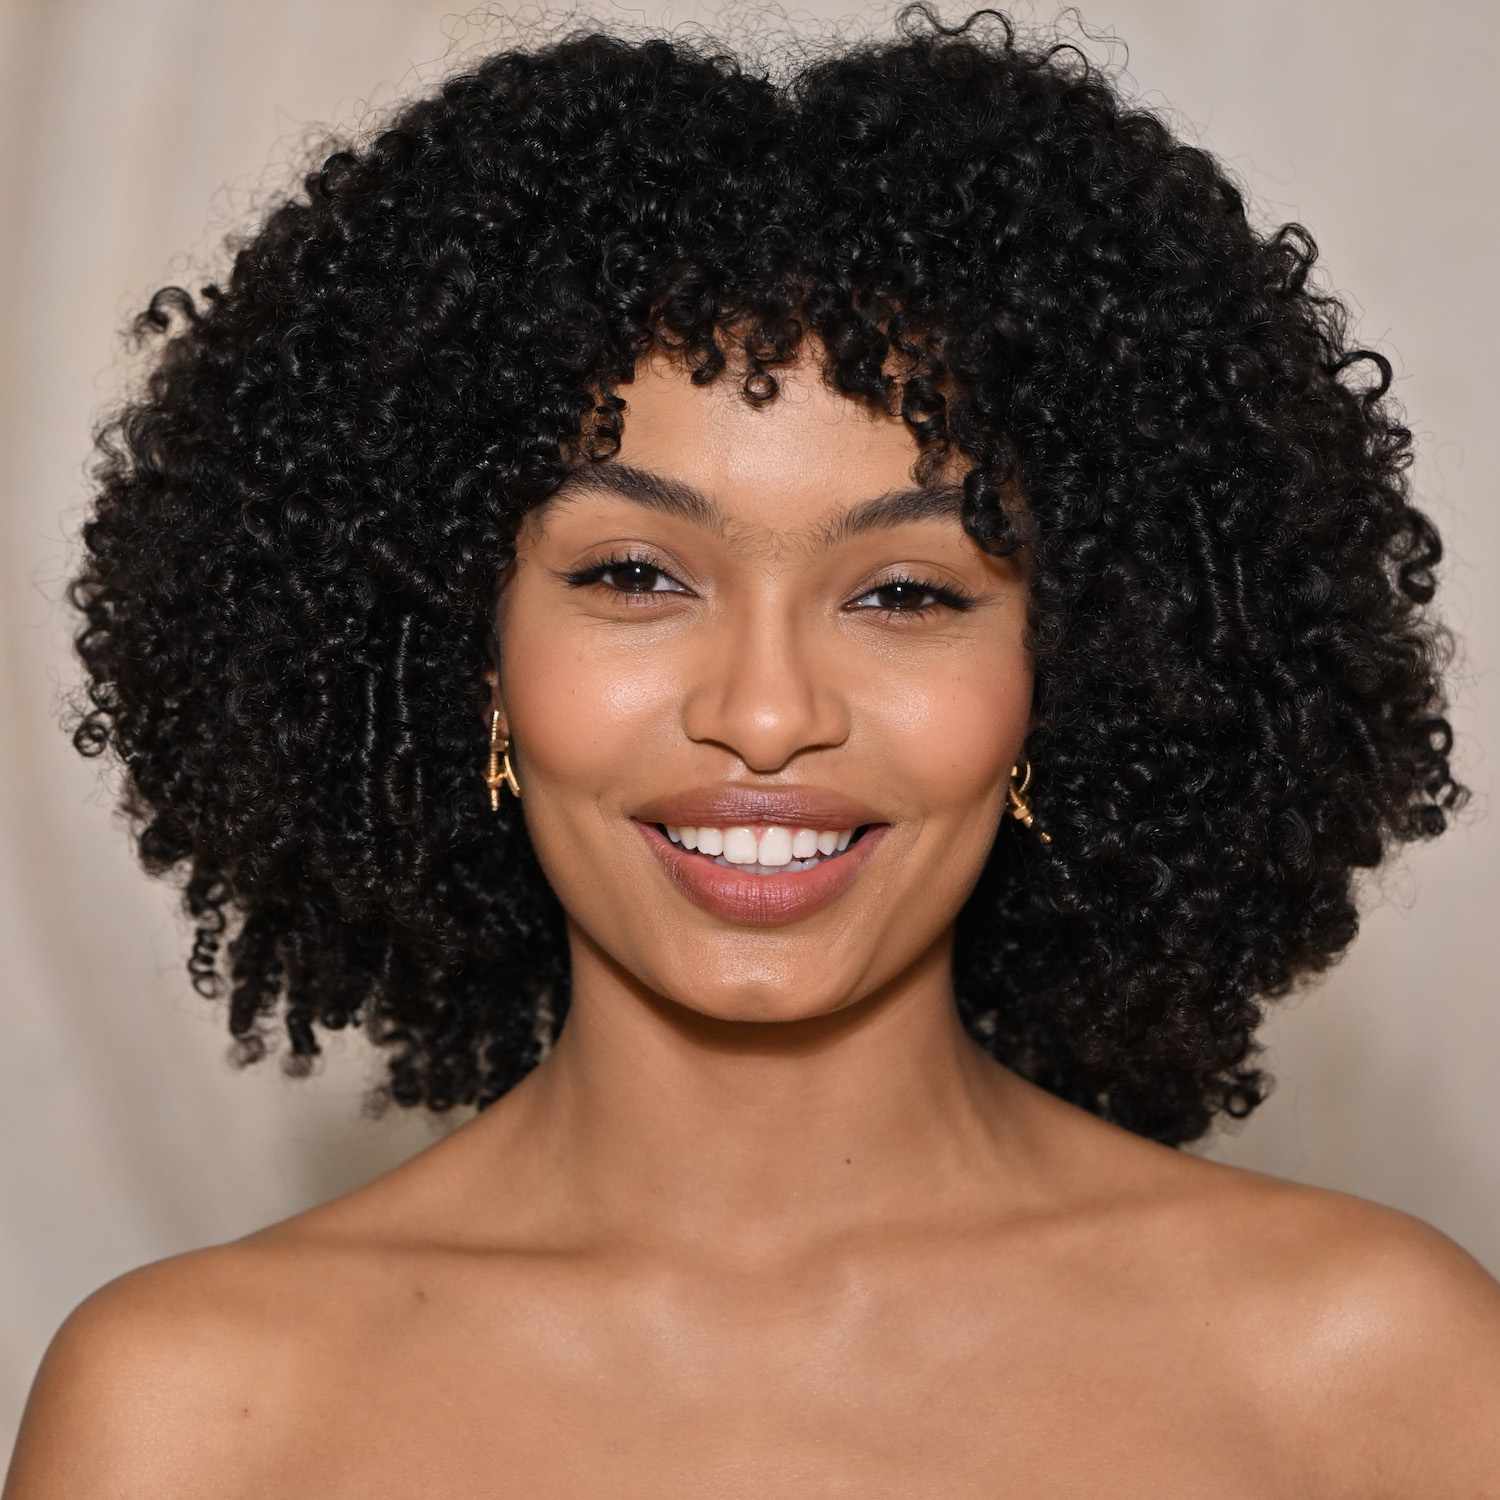 Yara Shahidi wears a heart-shaped afro hairstyle with bangs and face-framing layers